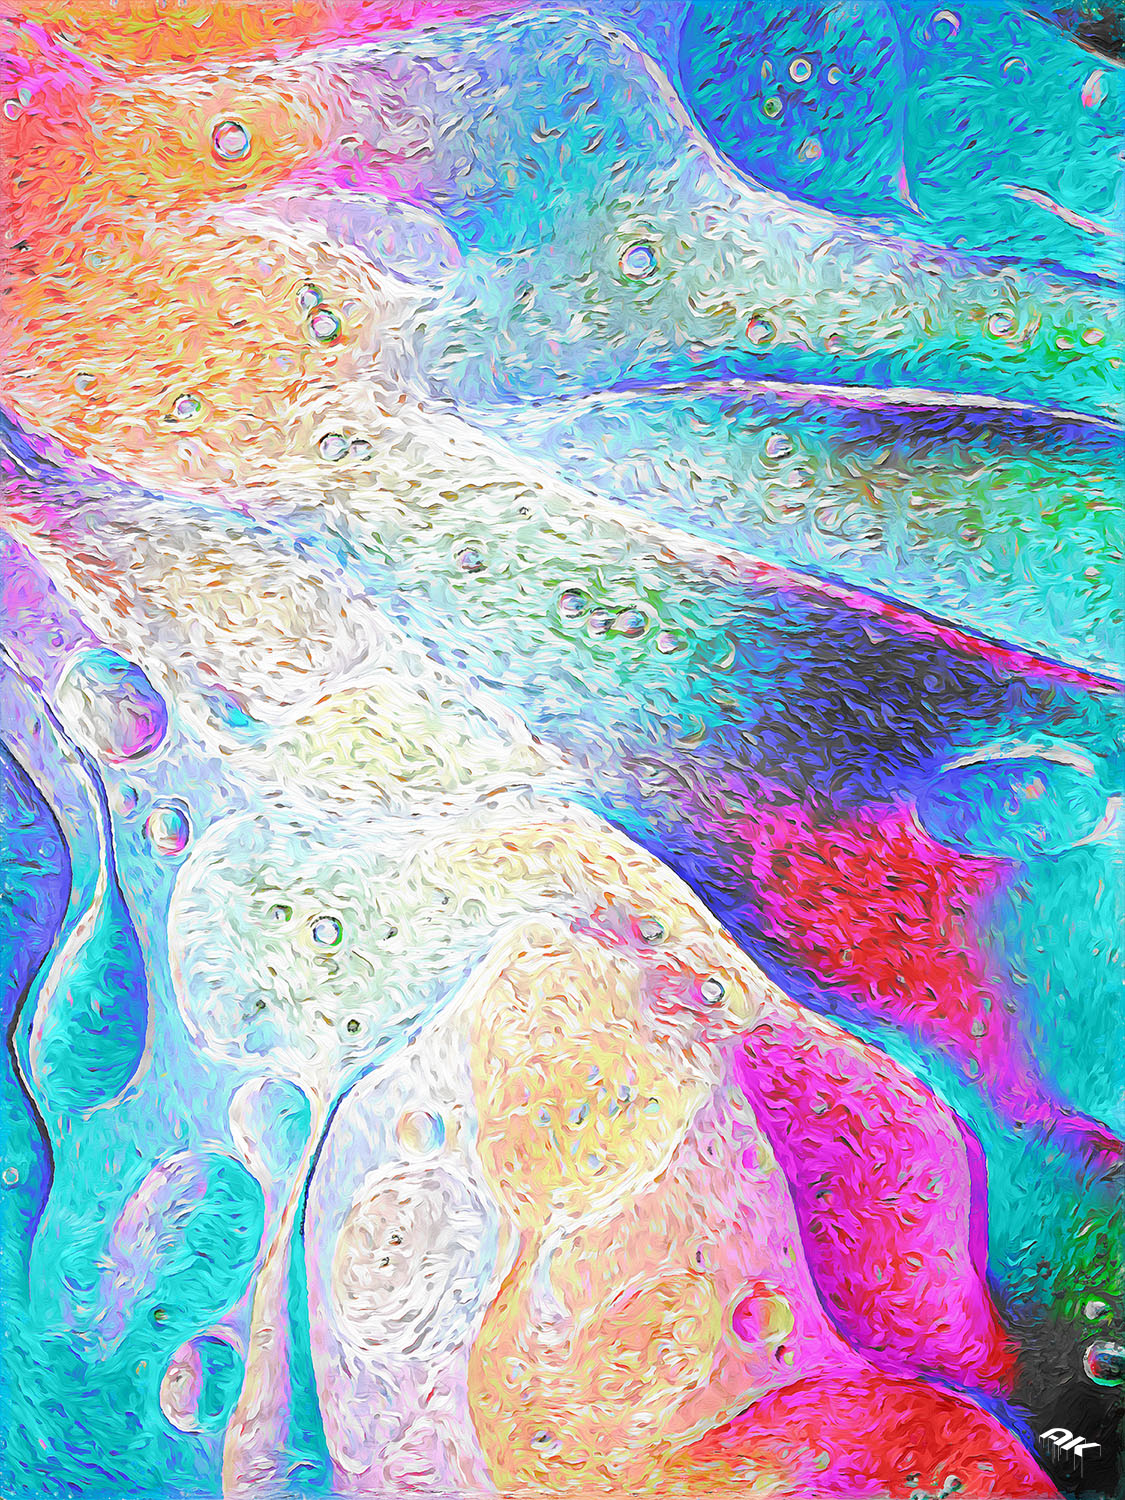 oil and water on colorful background